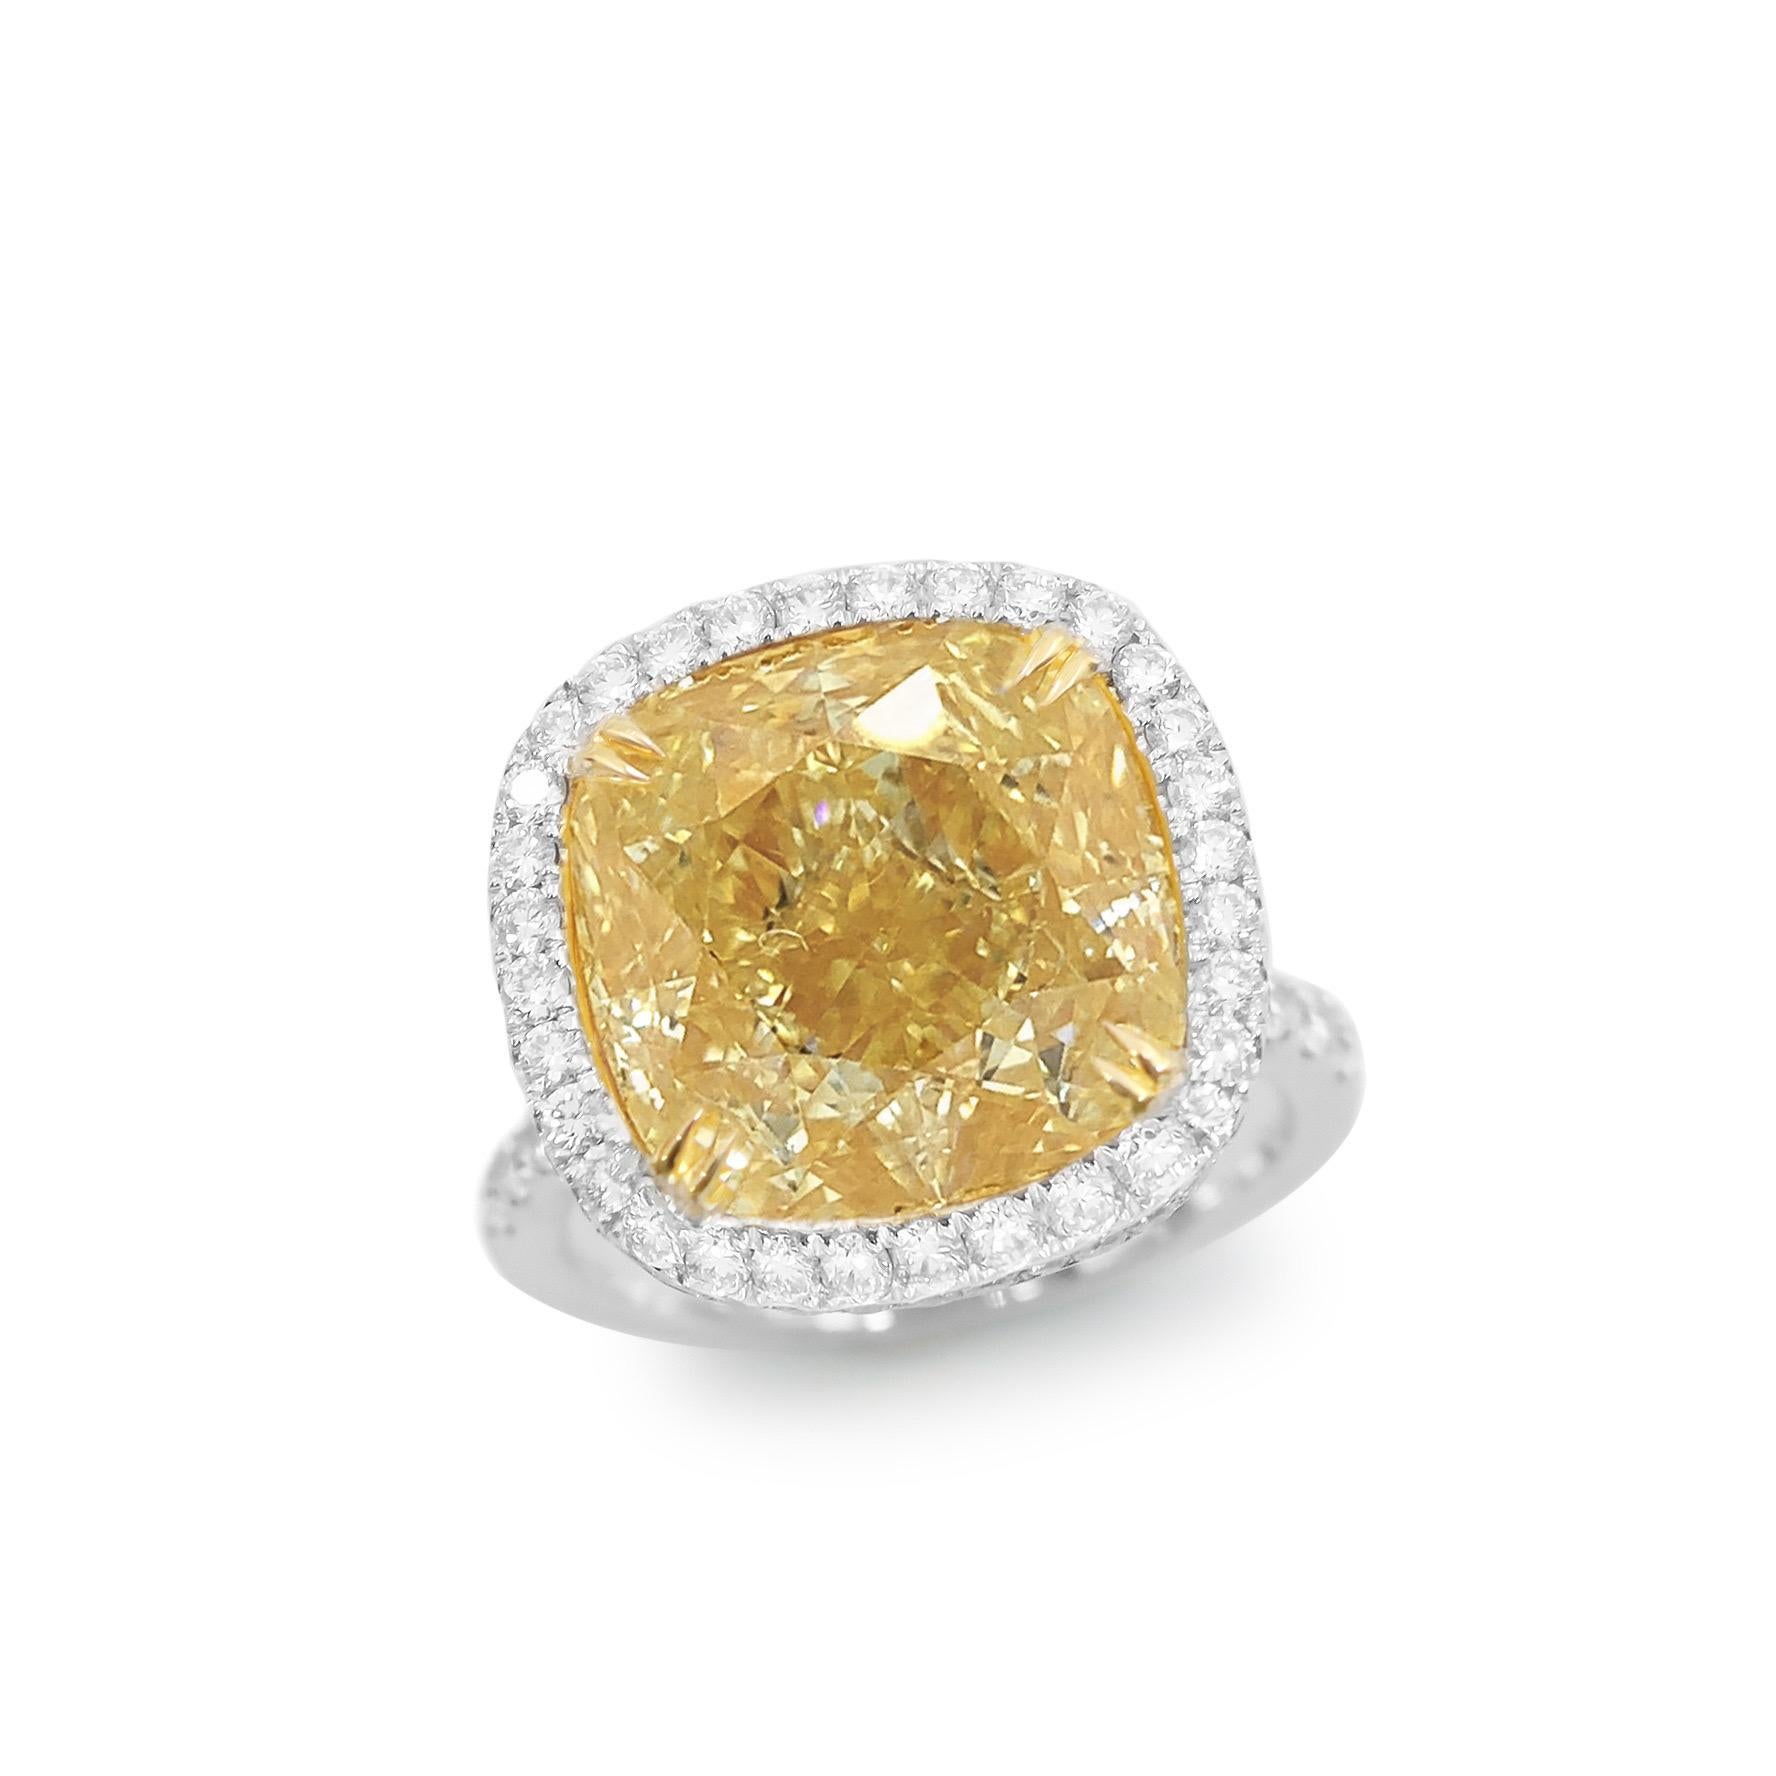 Emilio Jewelry Gia Certified 13.36 Carat Fancy Yellow Diamond Ring  In New Condition For Sale In New York, NY